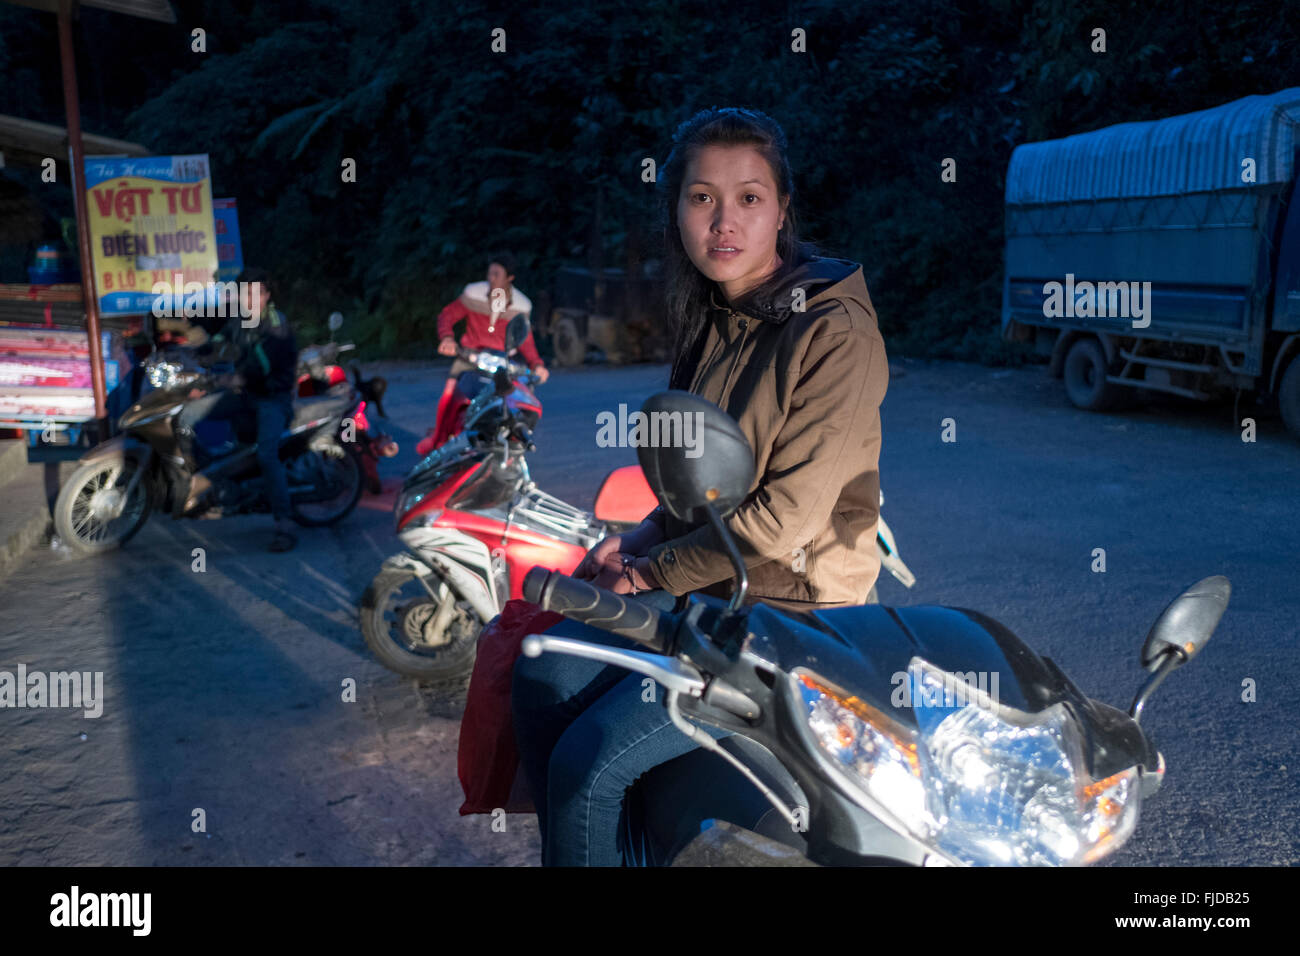 A young woman rests on her motorbike in the village of Ban Khoang in northern Vietnam Stock Photo